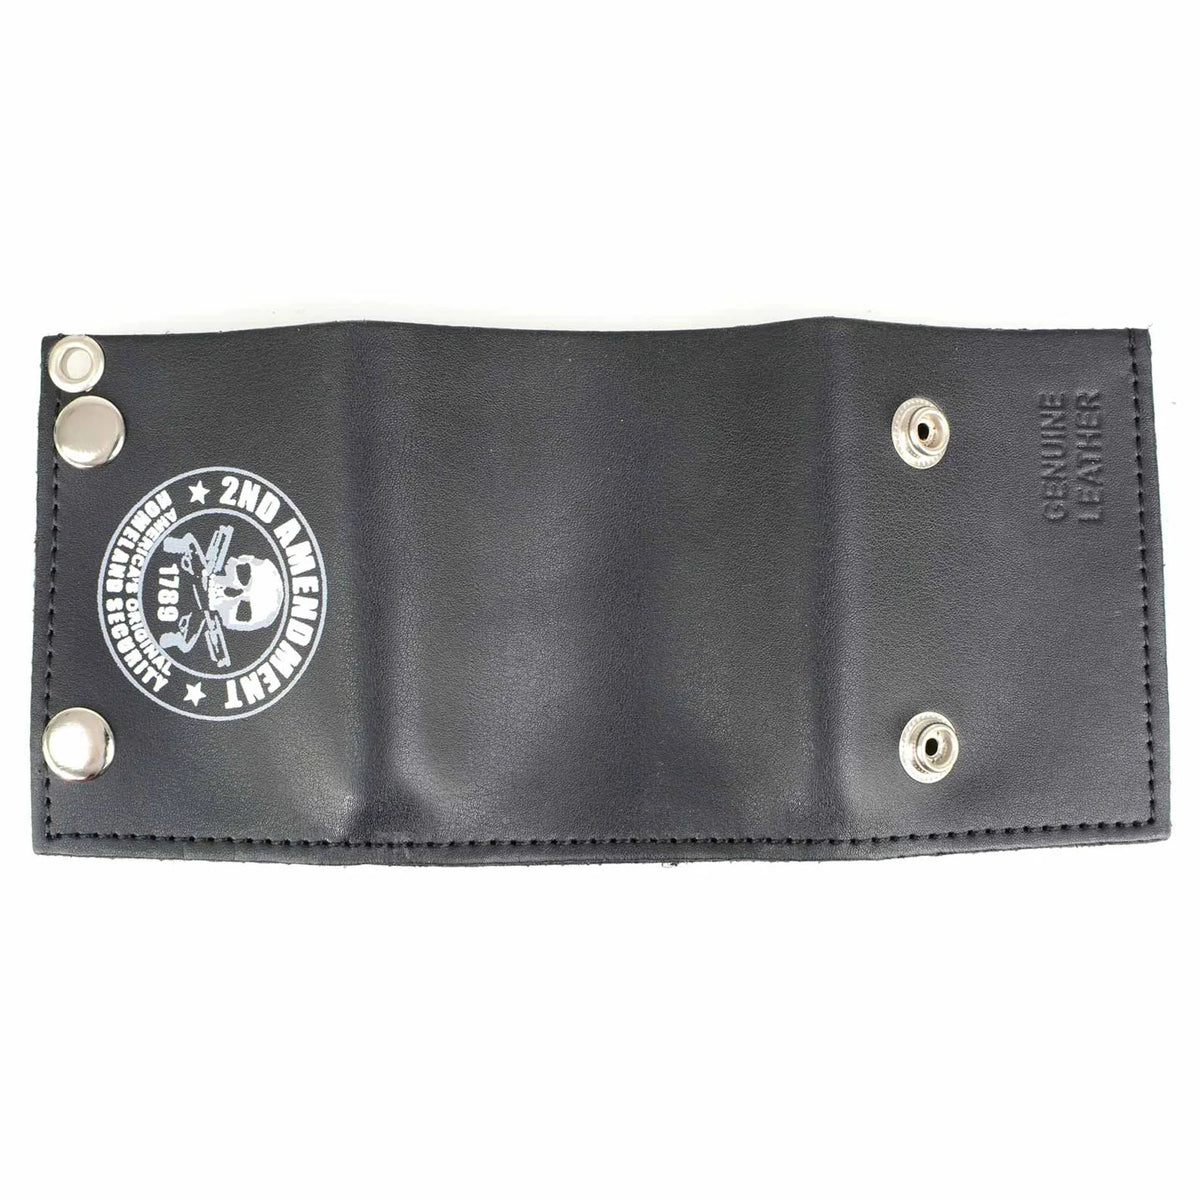 Men's 4” Leather “2nd Amendment” Tri-Fold Wallet w/ Anti-Theft Stainless Steel Chain